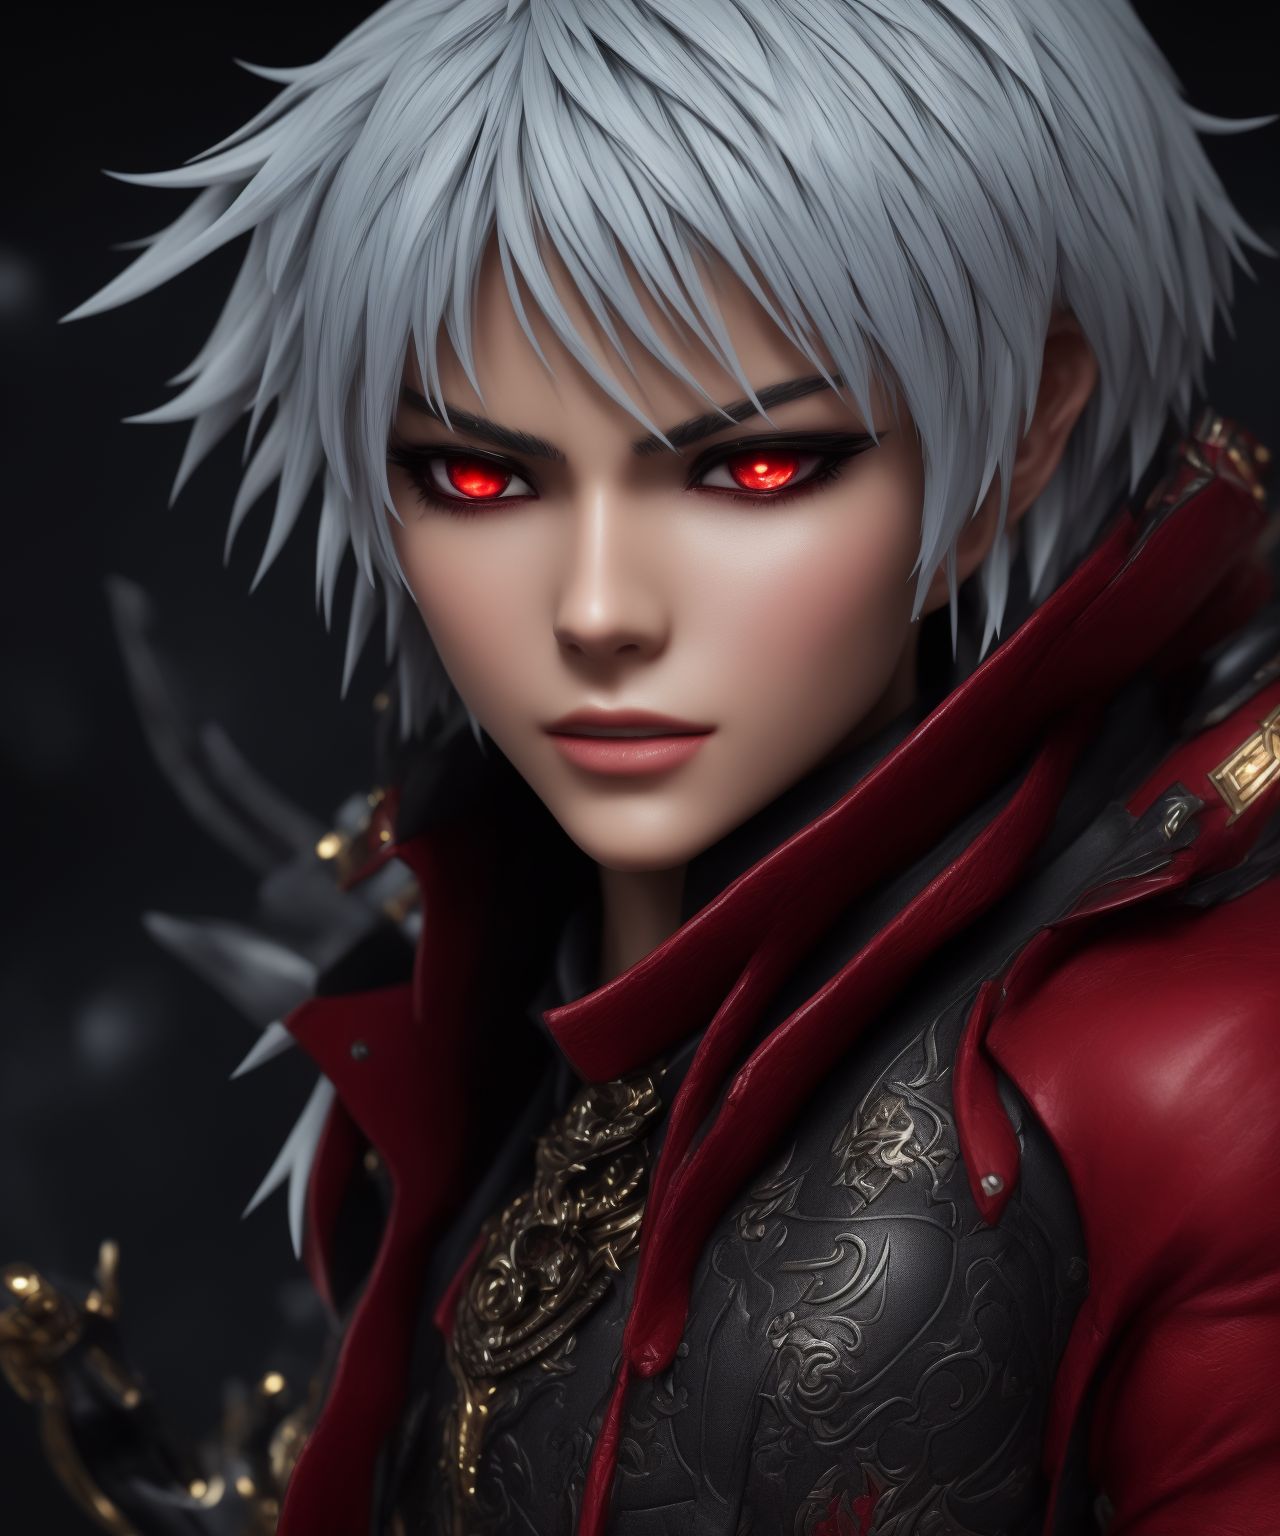 Dante character from devil may cry 5 with 2010s anime trait